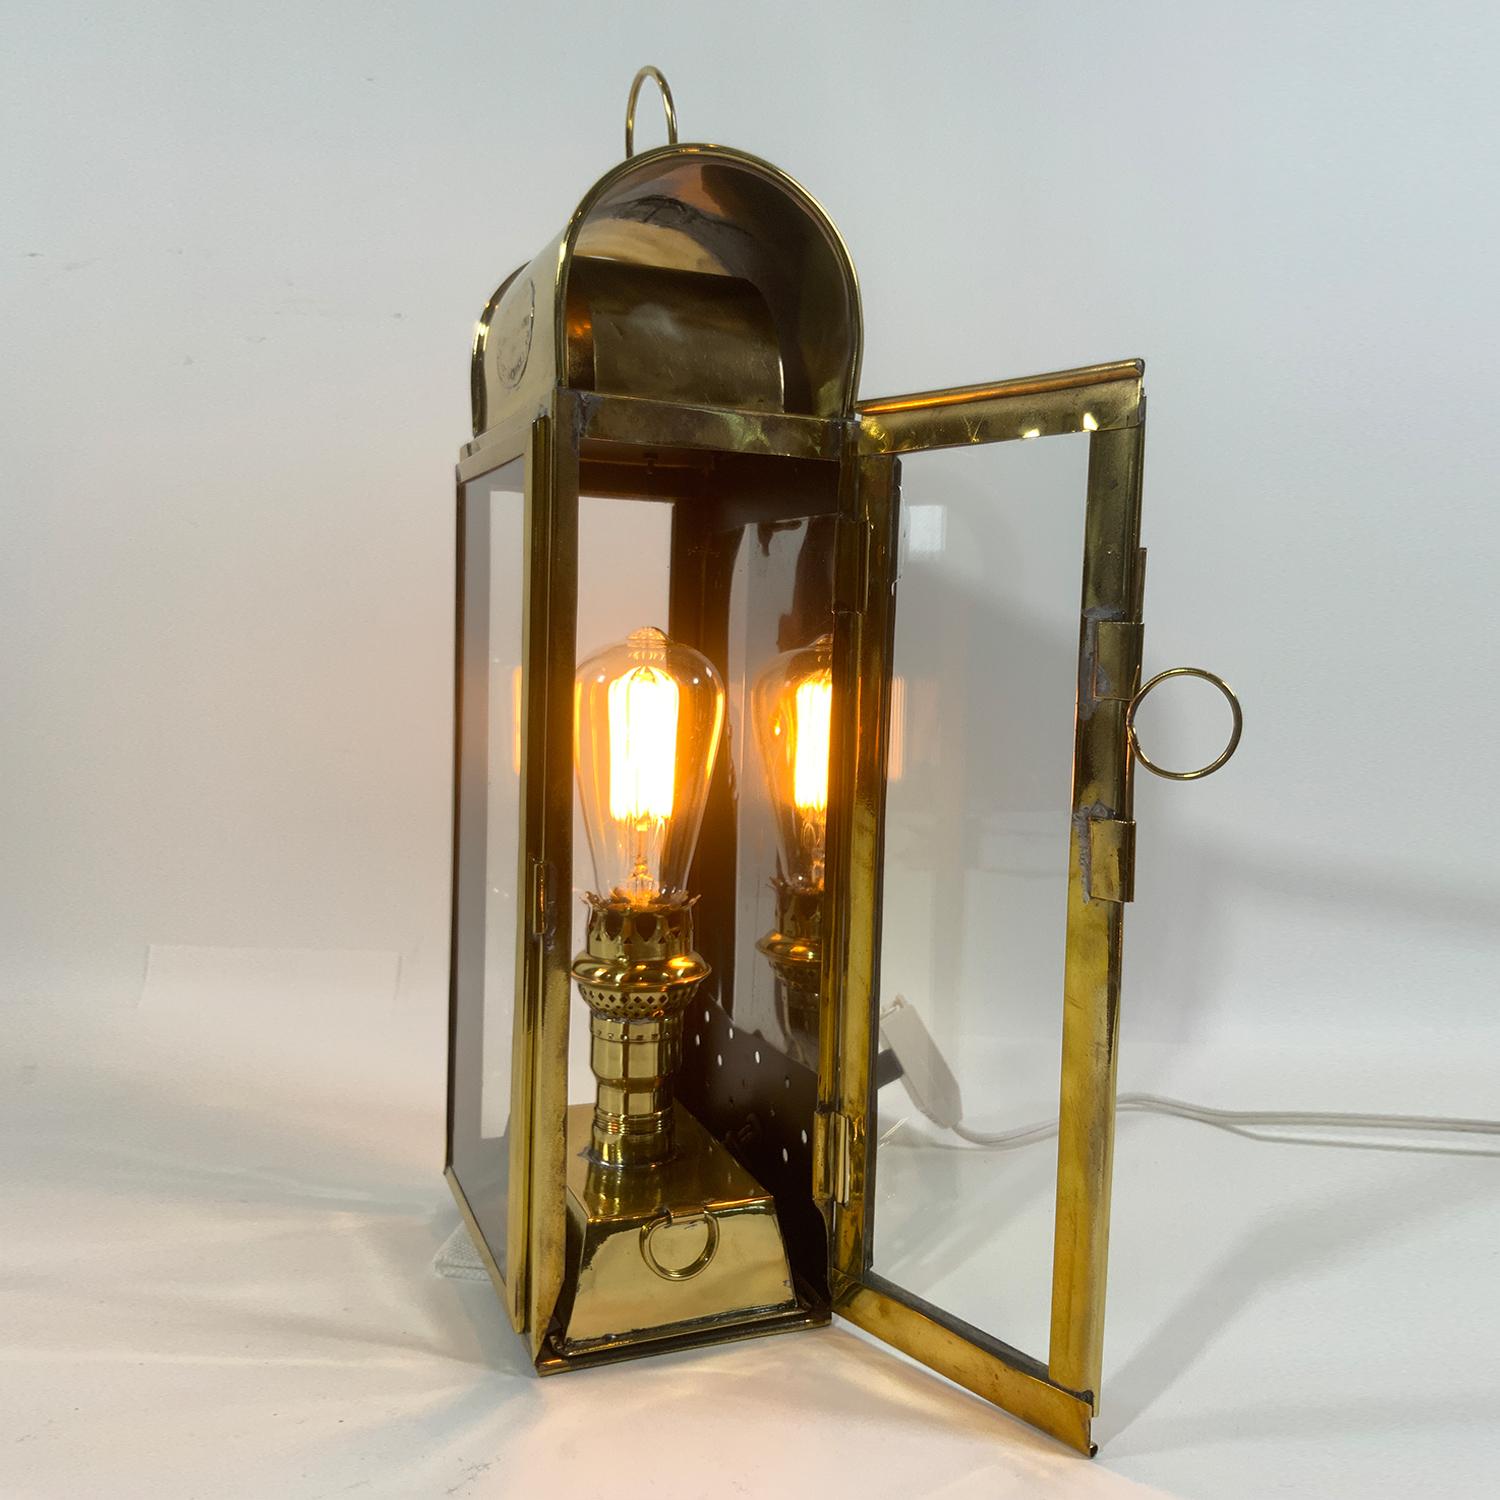 Lacquered Polished Ships Cabin Lantern by Davey of London For Sale